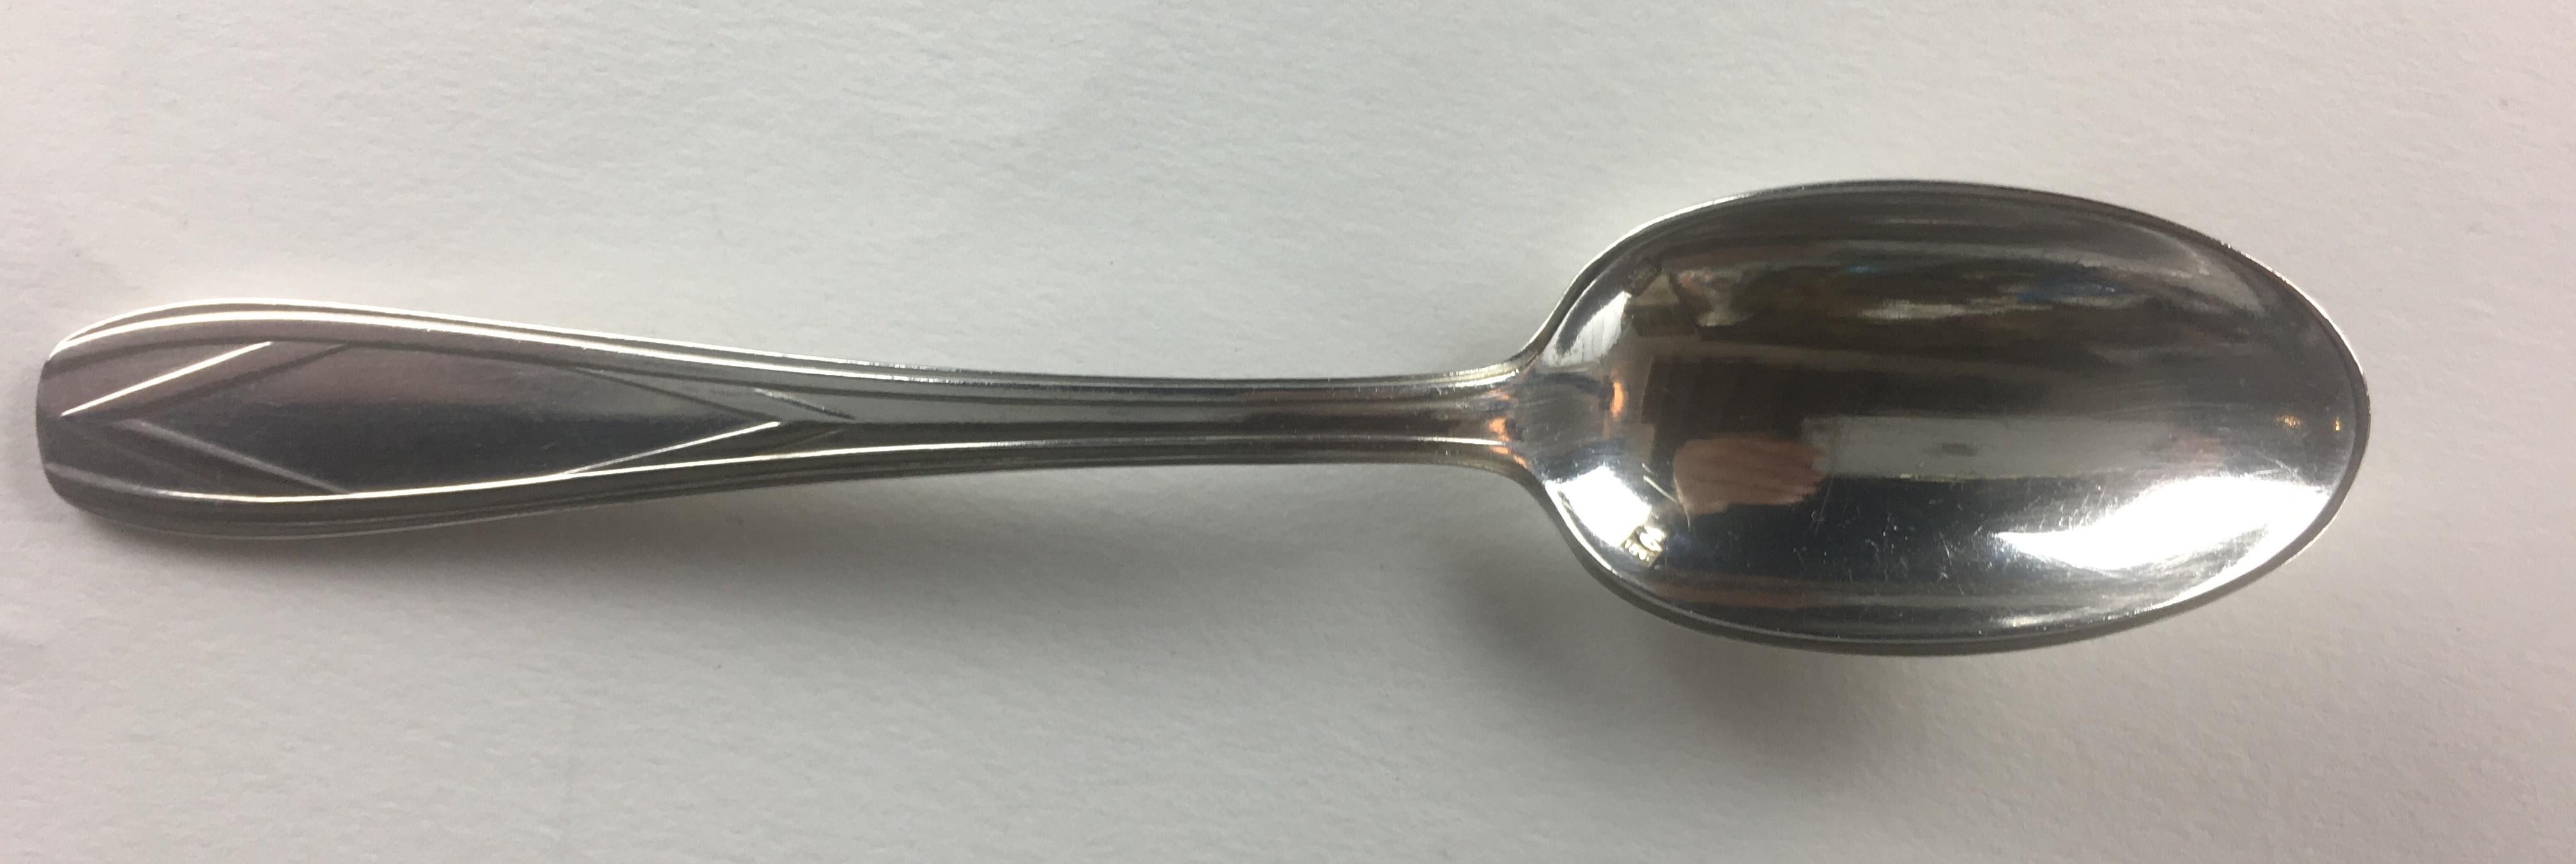 French Art Deco Silver Plated Tea Spoon Set of 12 with Original Box In Good Condition For Sale In Miami, FL